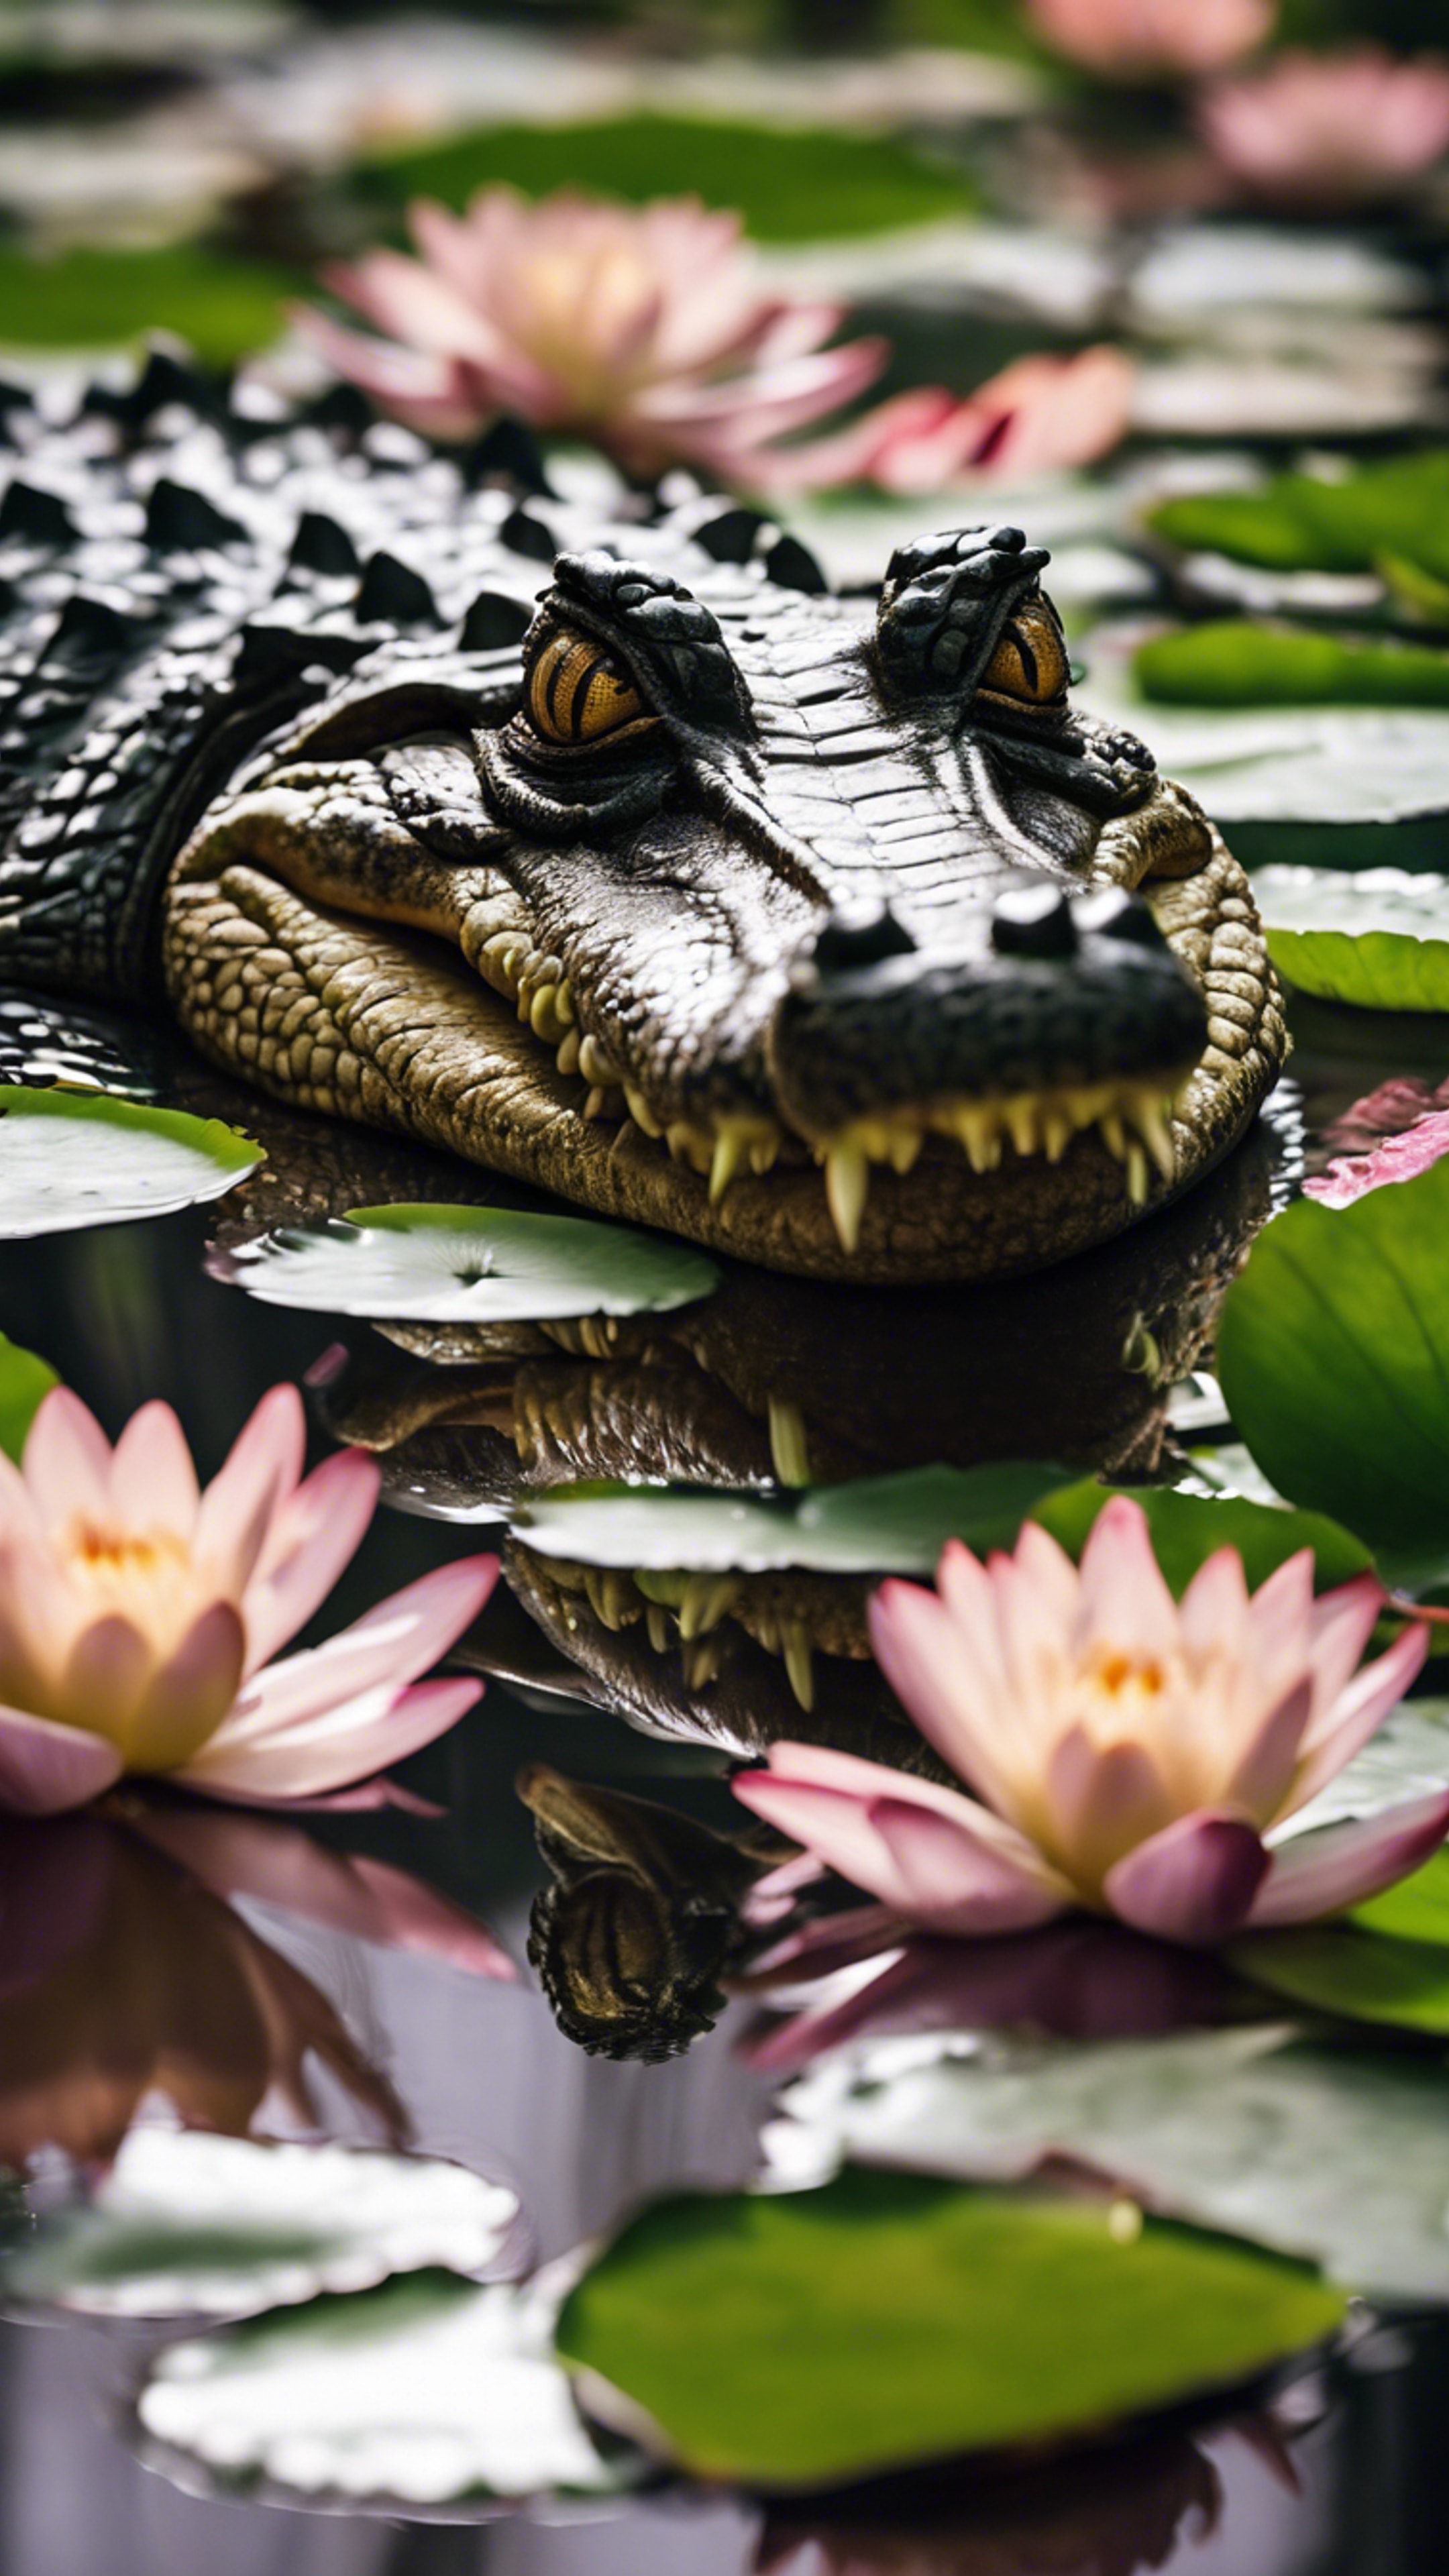 A crocodile lurking beneath a blanket of water lilies, waiting for the right moment.壁紙[035e2cfbc0d0411480ae]